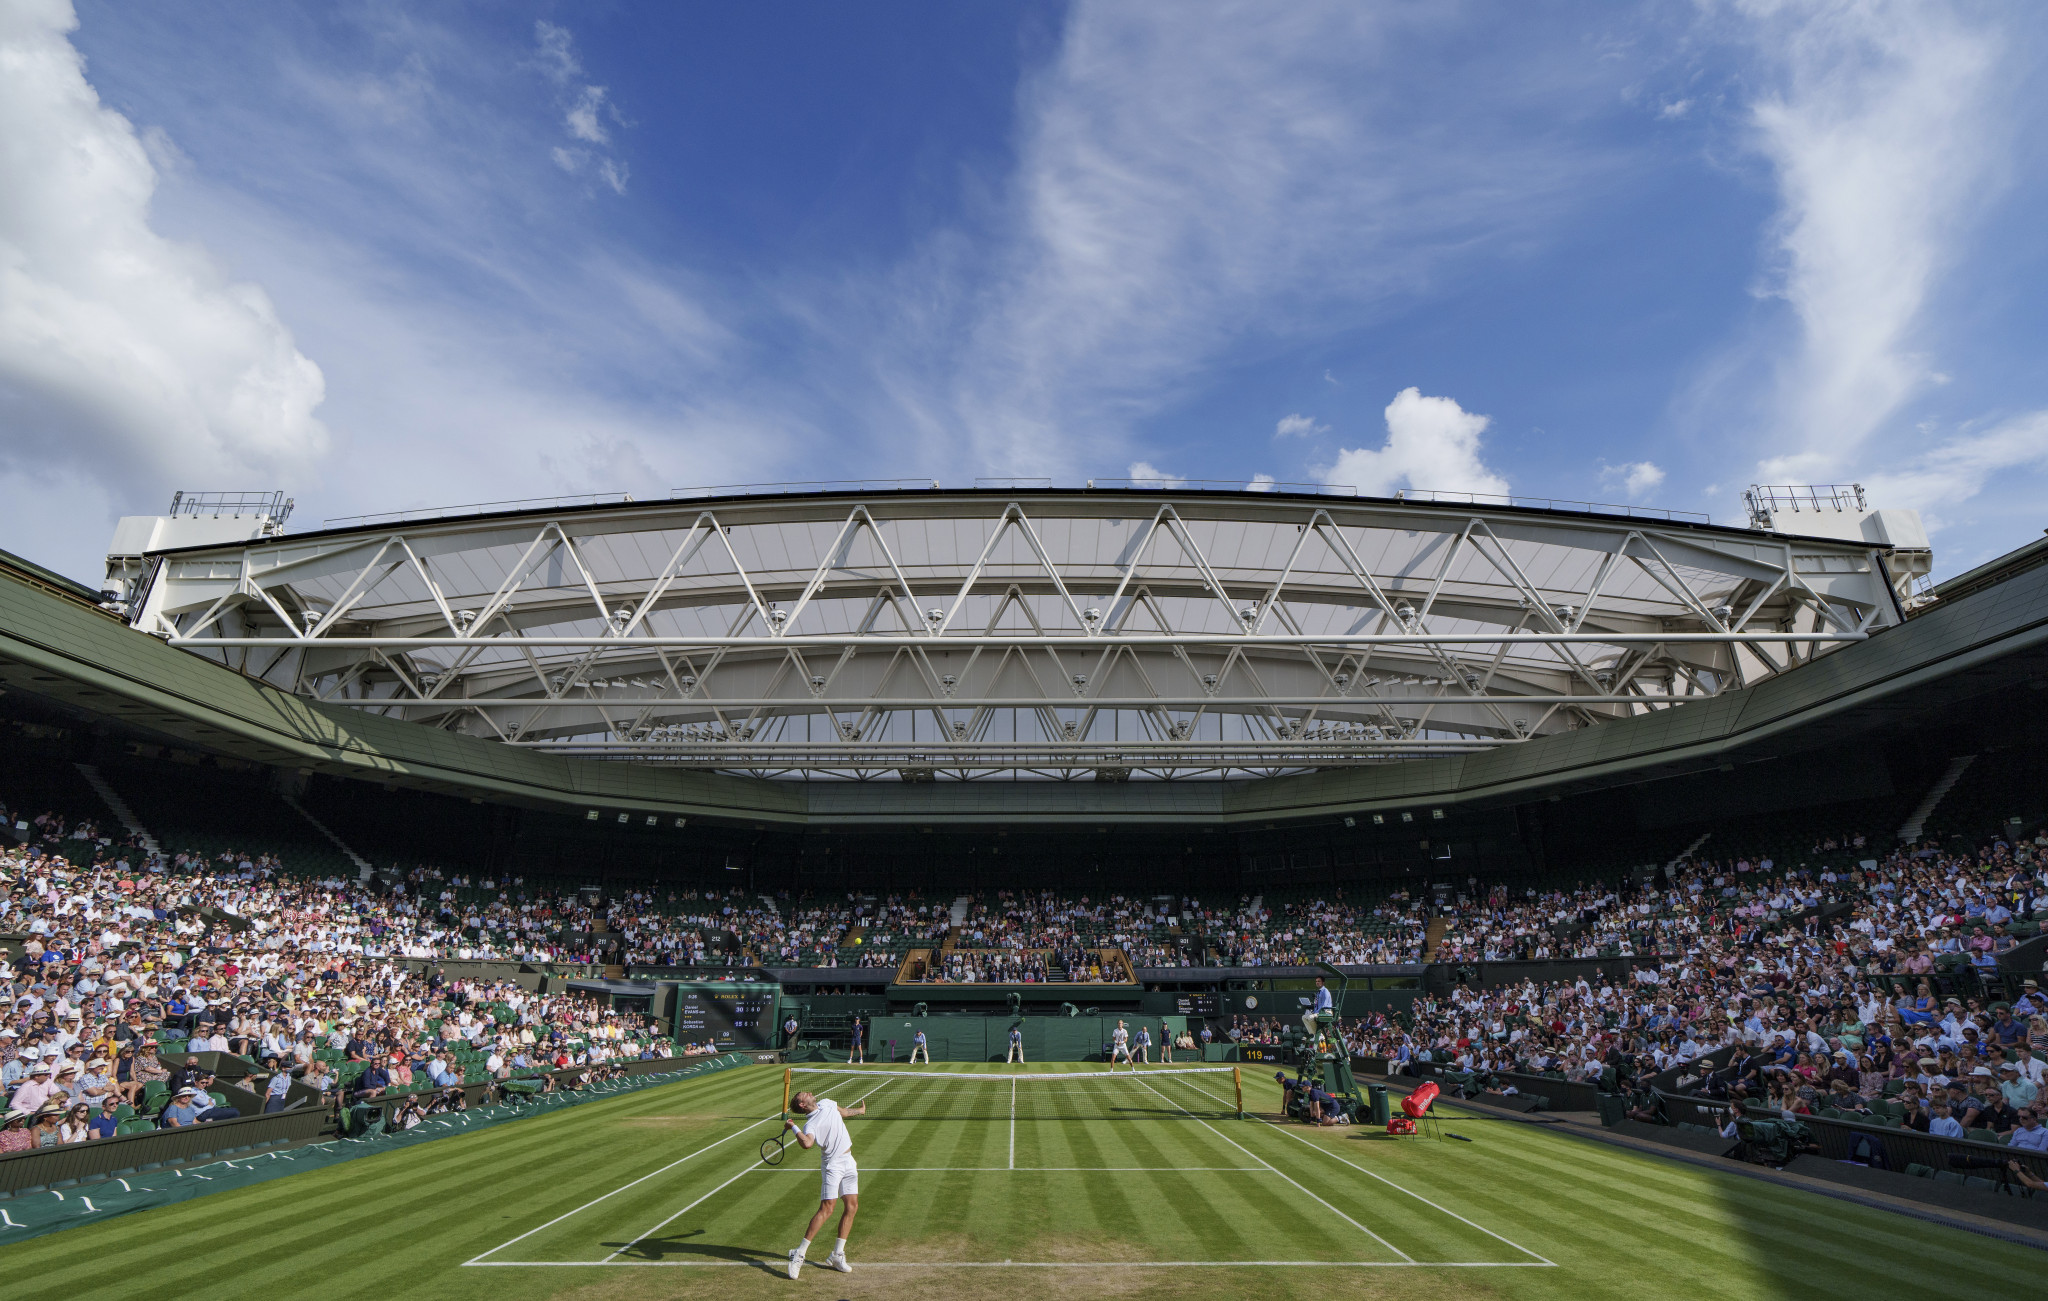 Ukrainian refugees offered free tickets for Wimbledon as AELTC pledges new donation